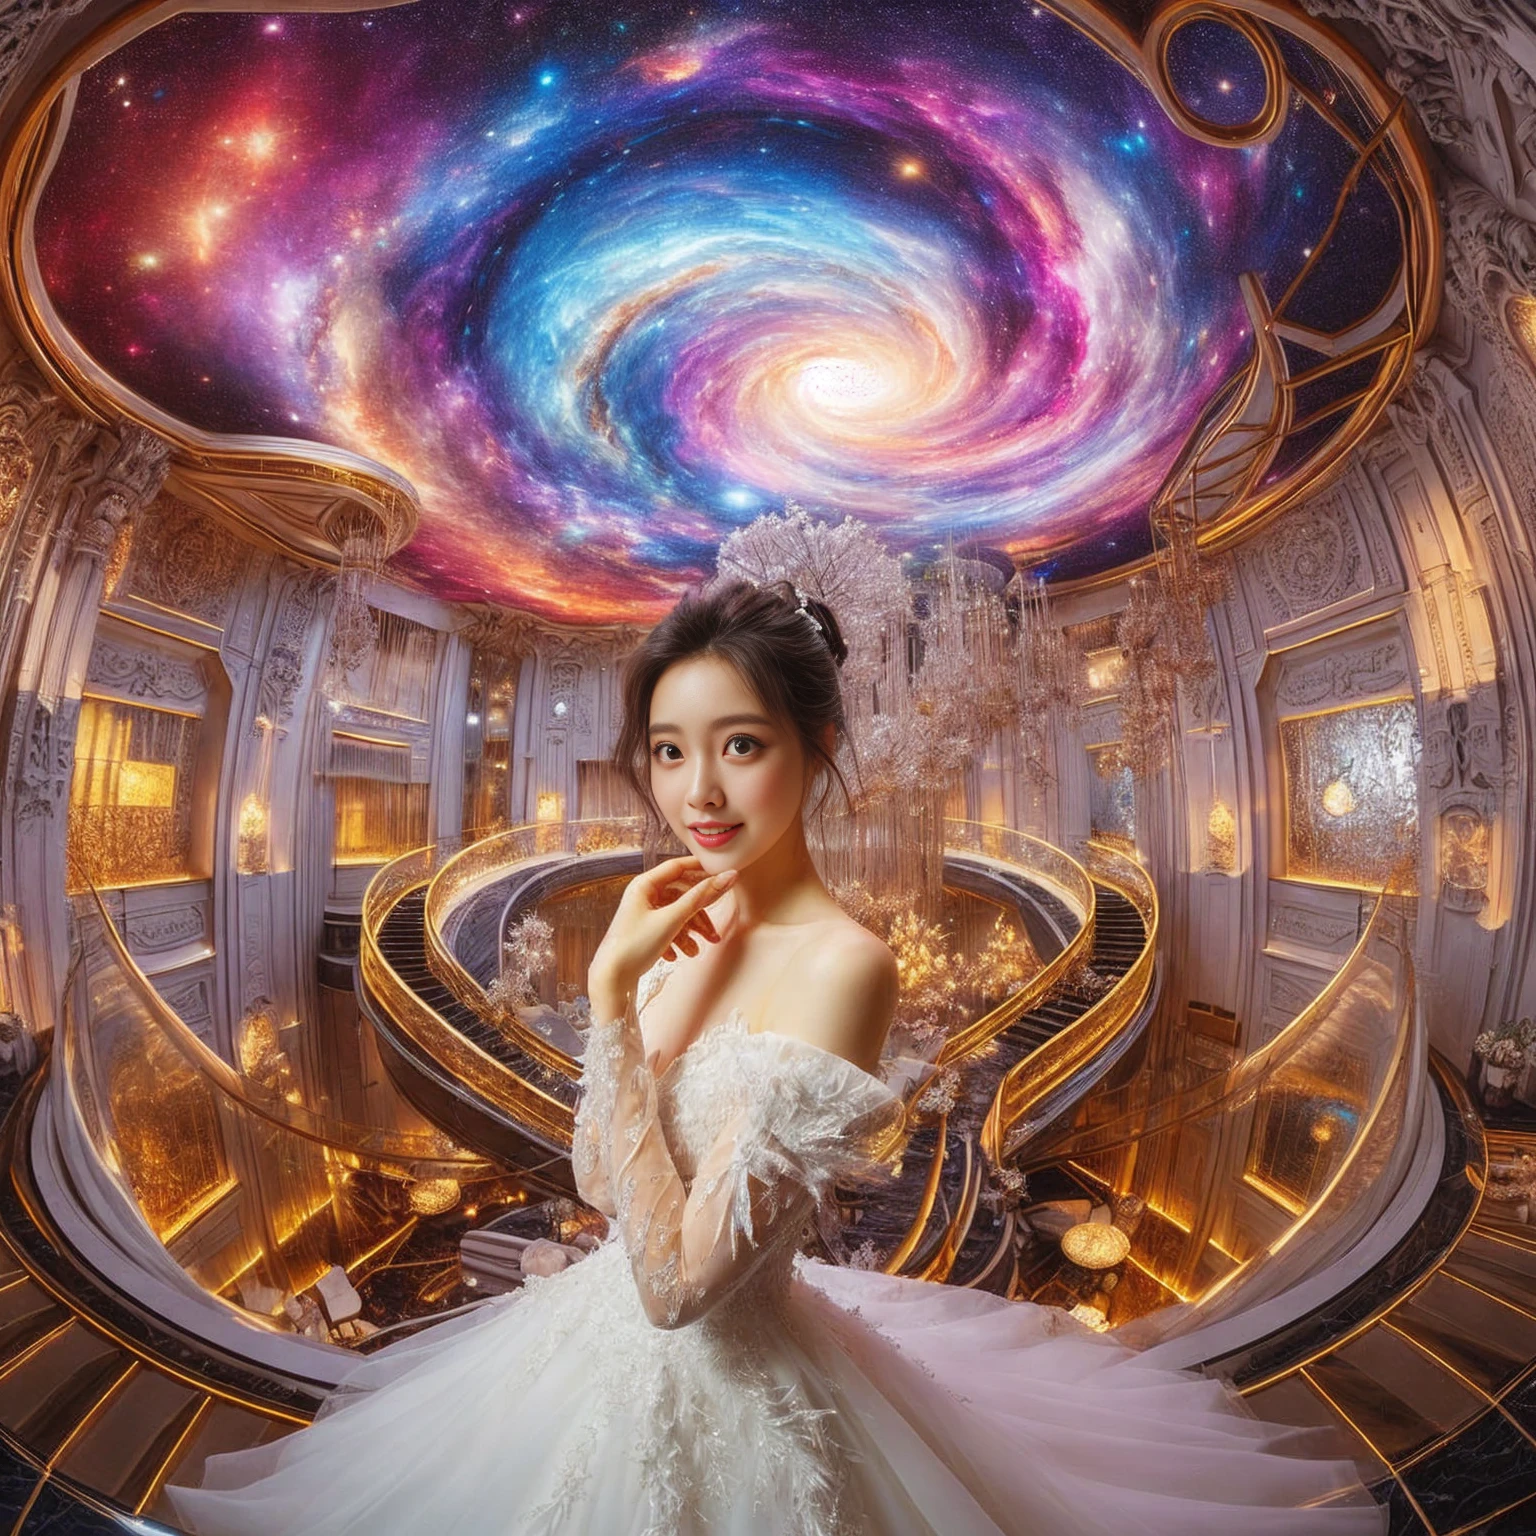 a woman in a wedding dress standing in a room with a spiral ceiling, smiling, goddess of galaxies, ethereal fantasy, wide angle fantasy art, 4k highly detailed digital art, ethereal beauty, fantasy space, fantasy beautiful, fantasy photography, digital art fantasy, inside her surreal vr castle, of ethereal fantasy, strange portrait with galaxy, goddess of space and time, 8k selfie photograph